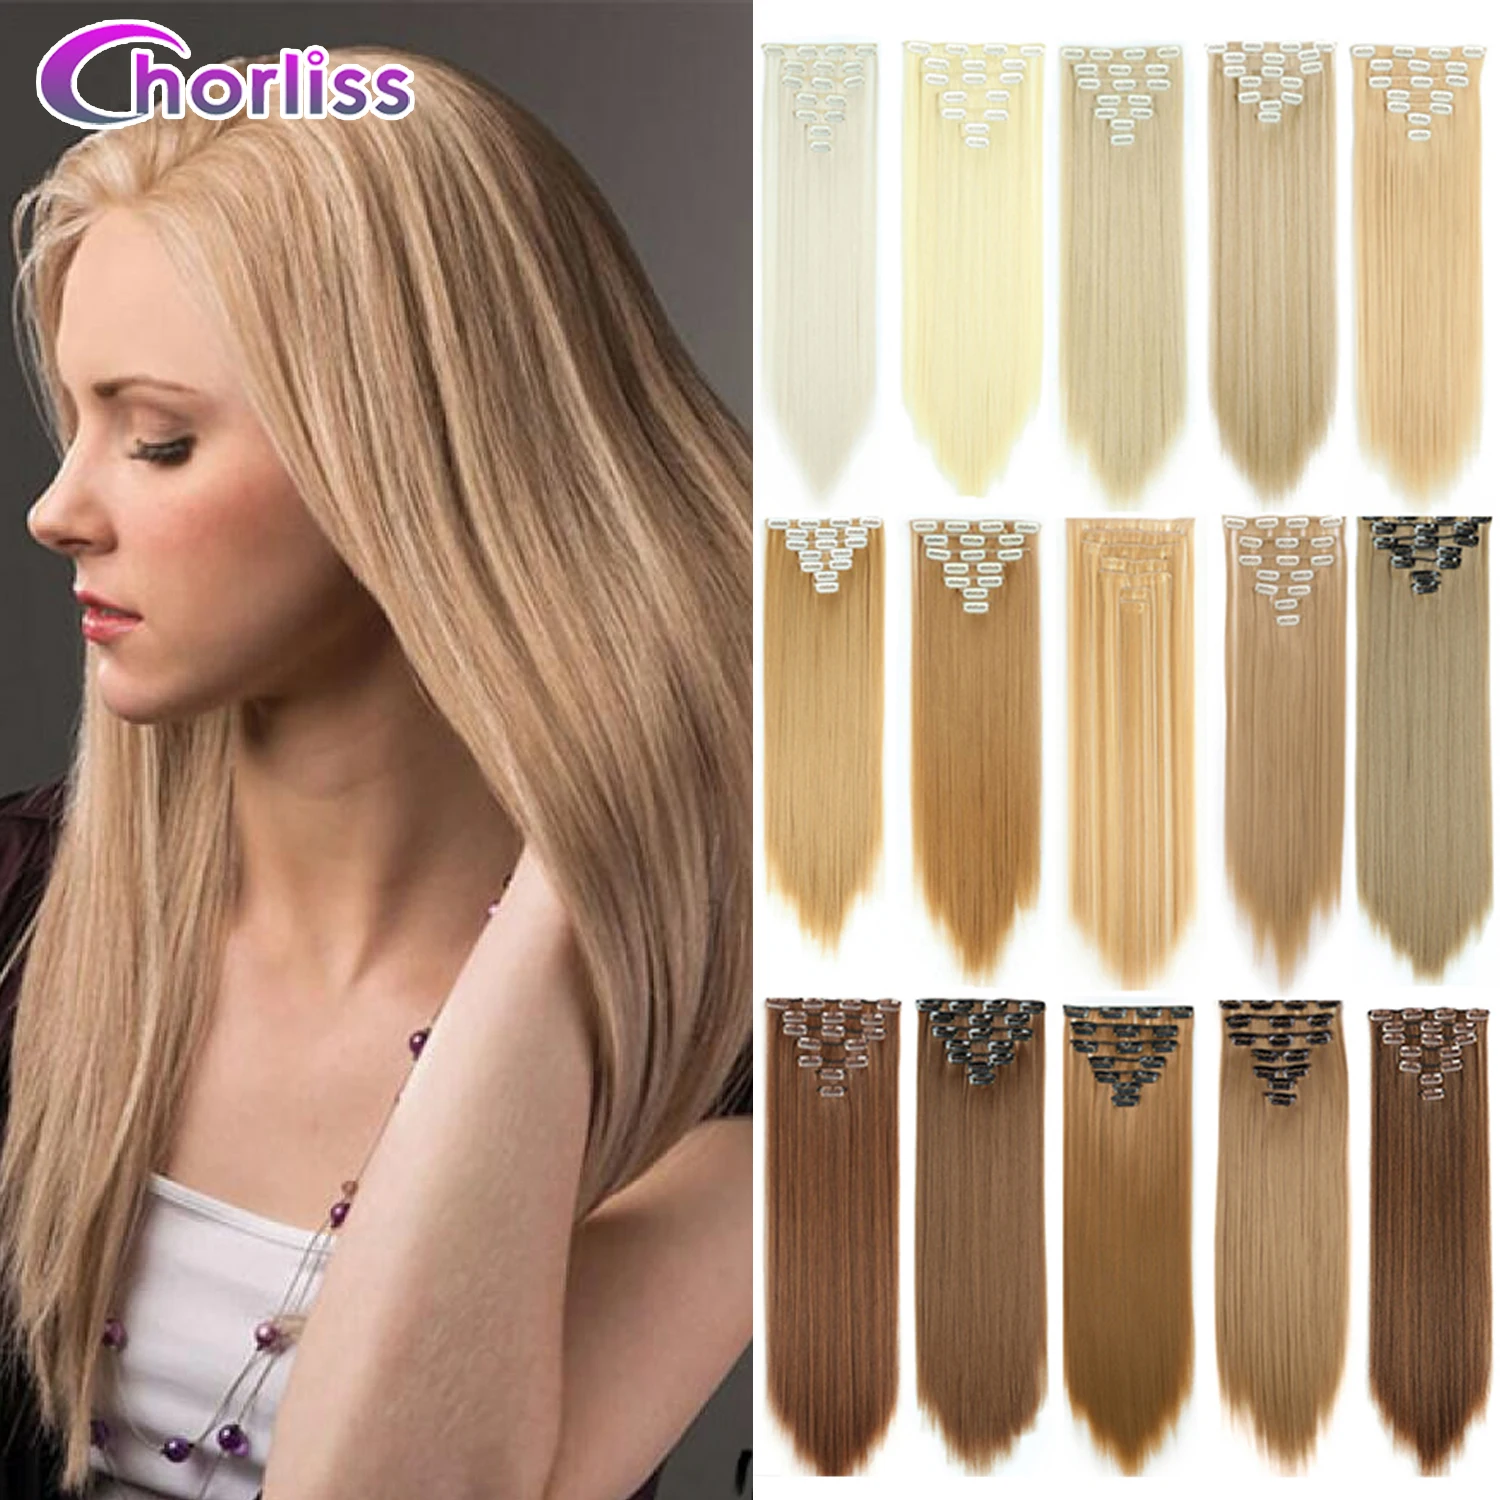 

Synthetic Long Straight Clip in Hair Extensions 22" Women Fake False Hair Pieces Ombre Black Brown Blonde Styling Hair 7Pcs